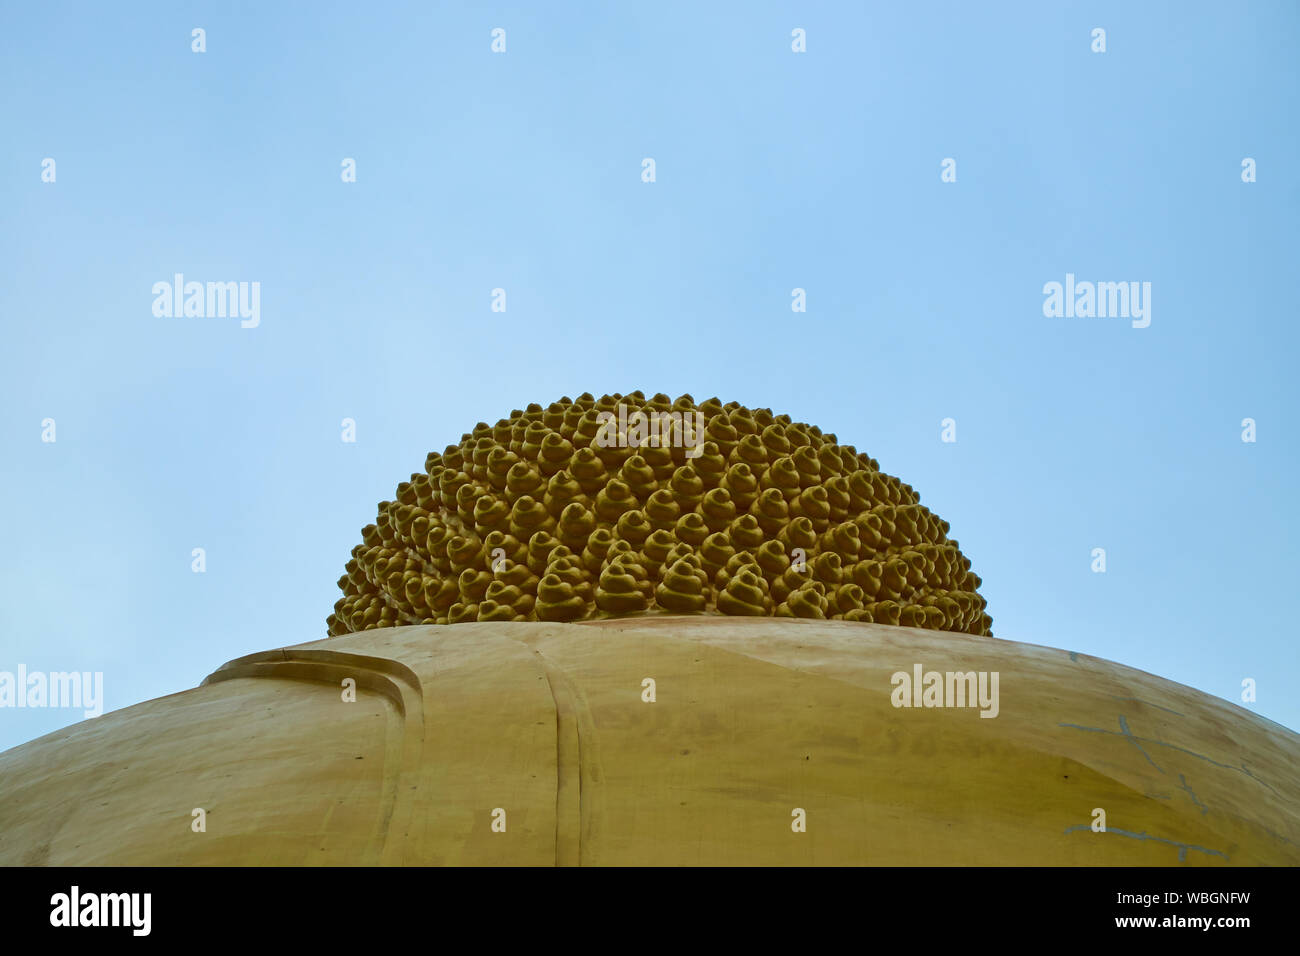 A look at the back of the head of the giant, gold, sitting Buddha at Wat Muang in Ang Thong, Thailand. Stock Photo